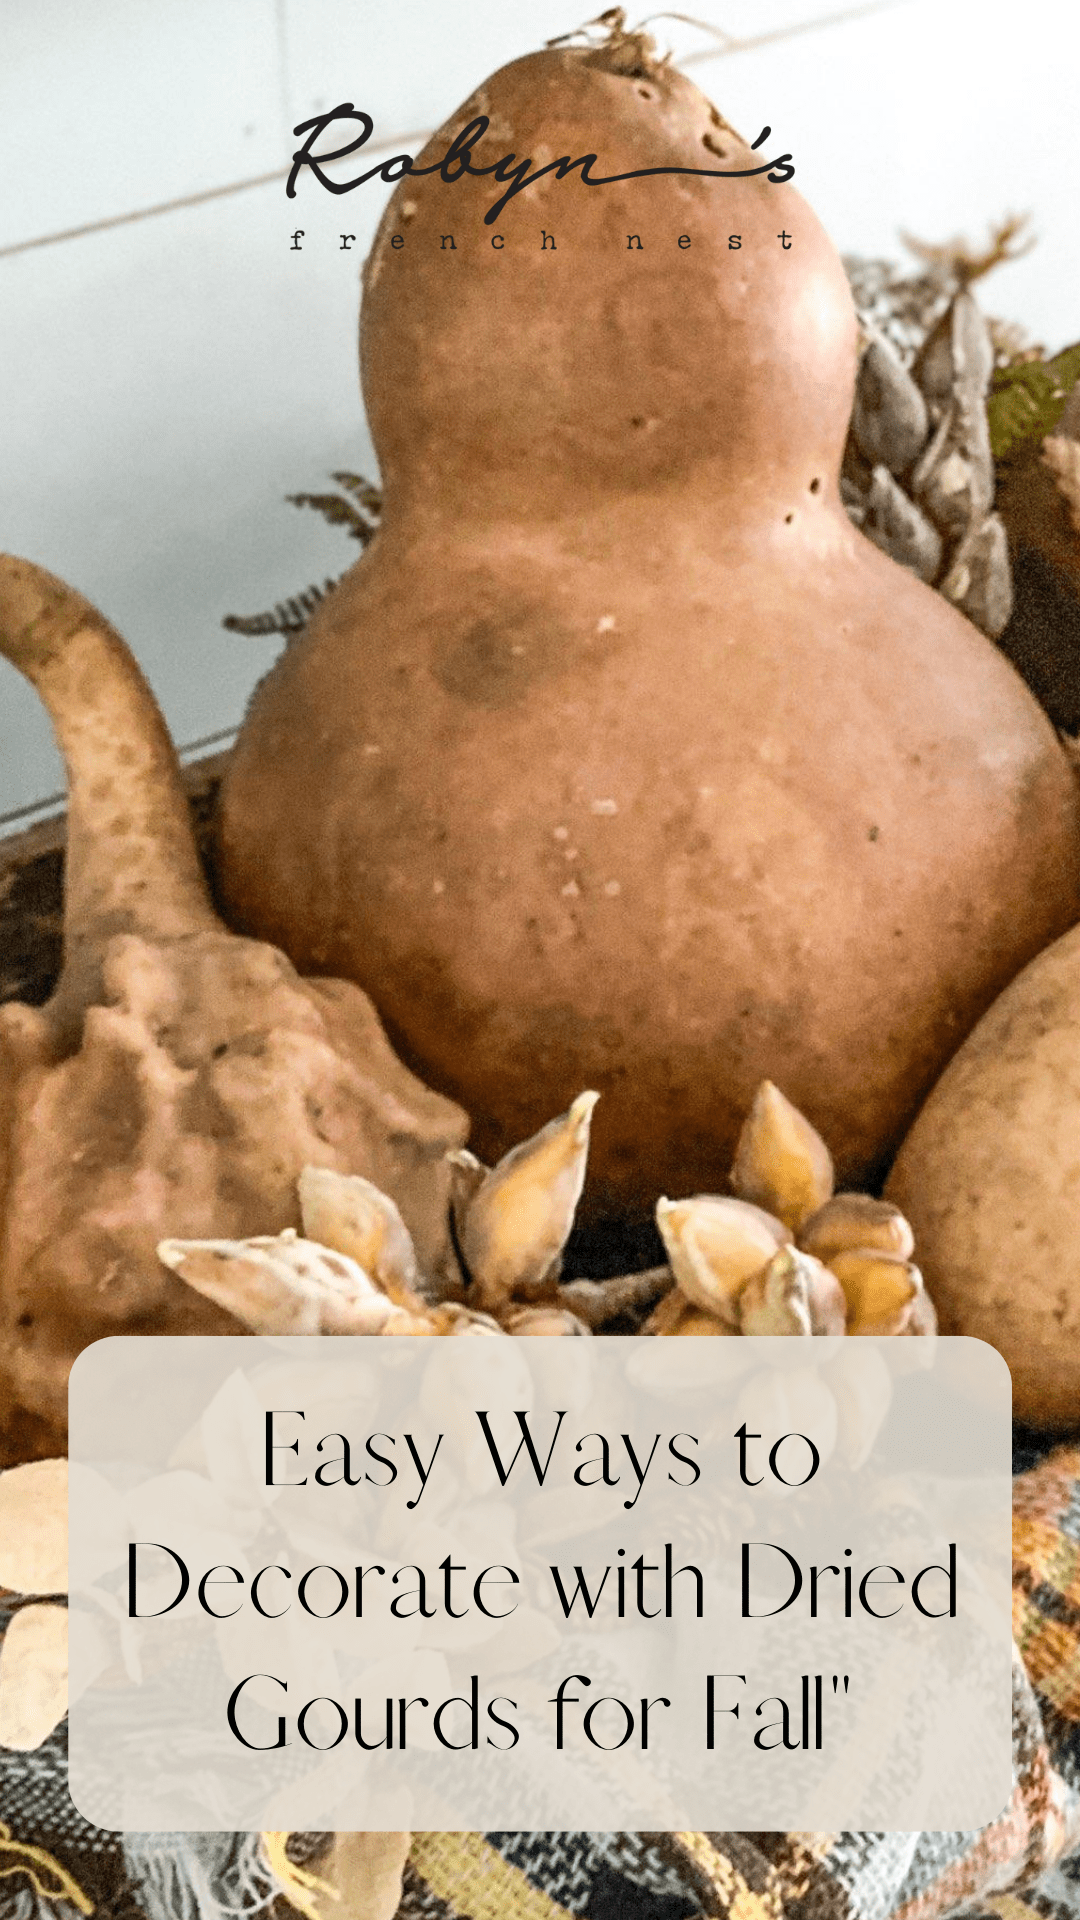 5 Beautiful Ways to Use Dried Gourds for Fall Decor